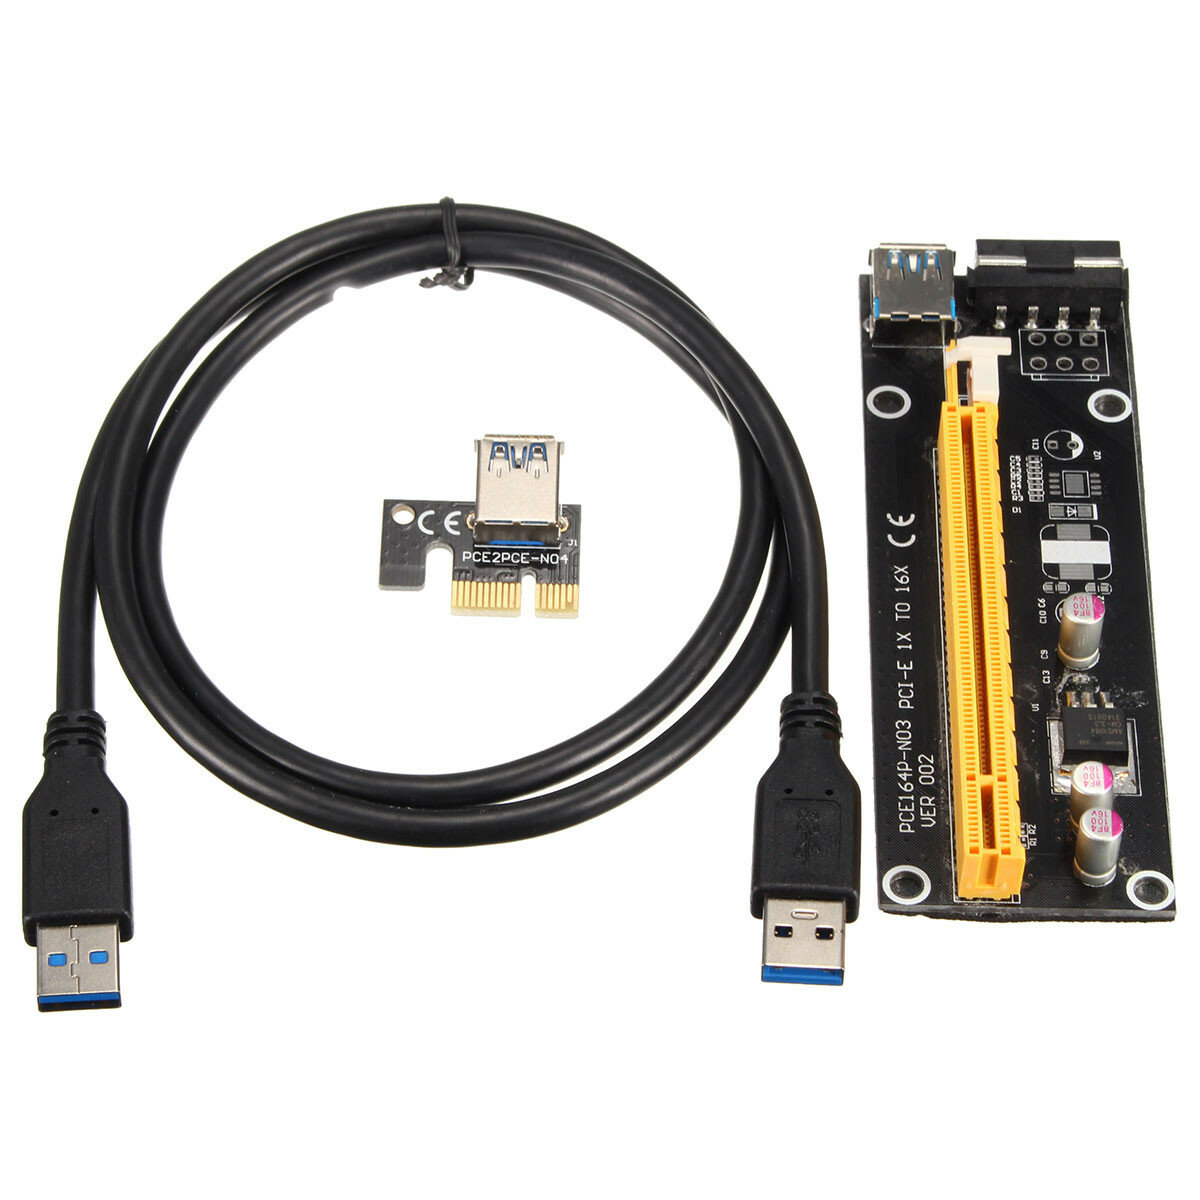 1X to 16X PCI-E Graphics Card Extension Cable USB 3.0 Expansion Card Power Supply with SATA Cable COD